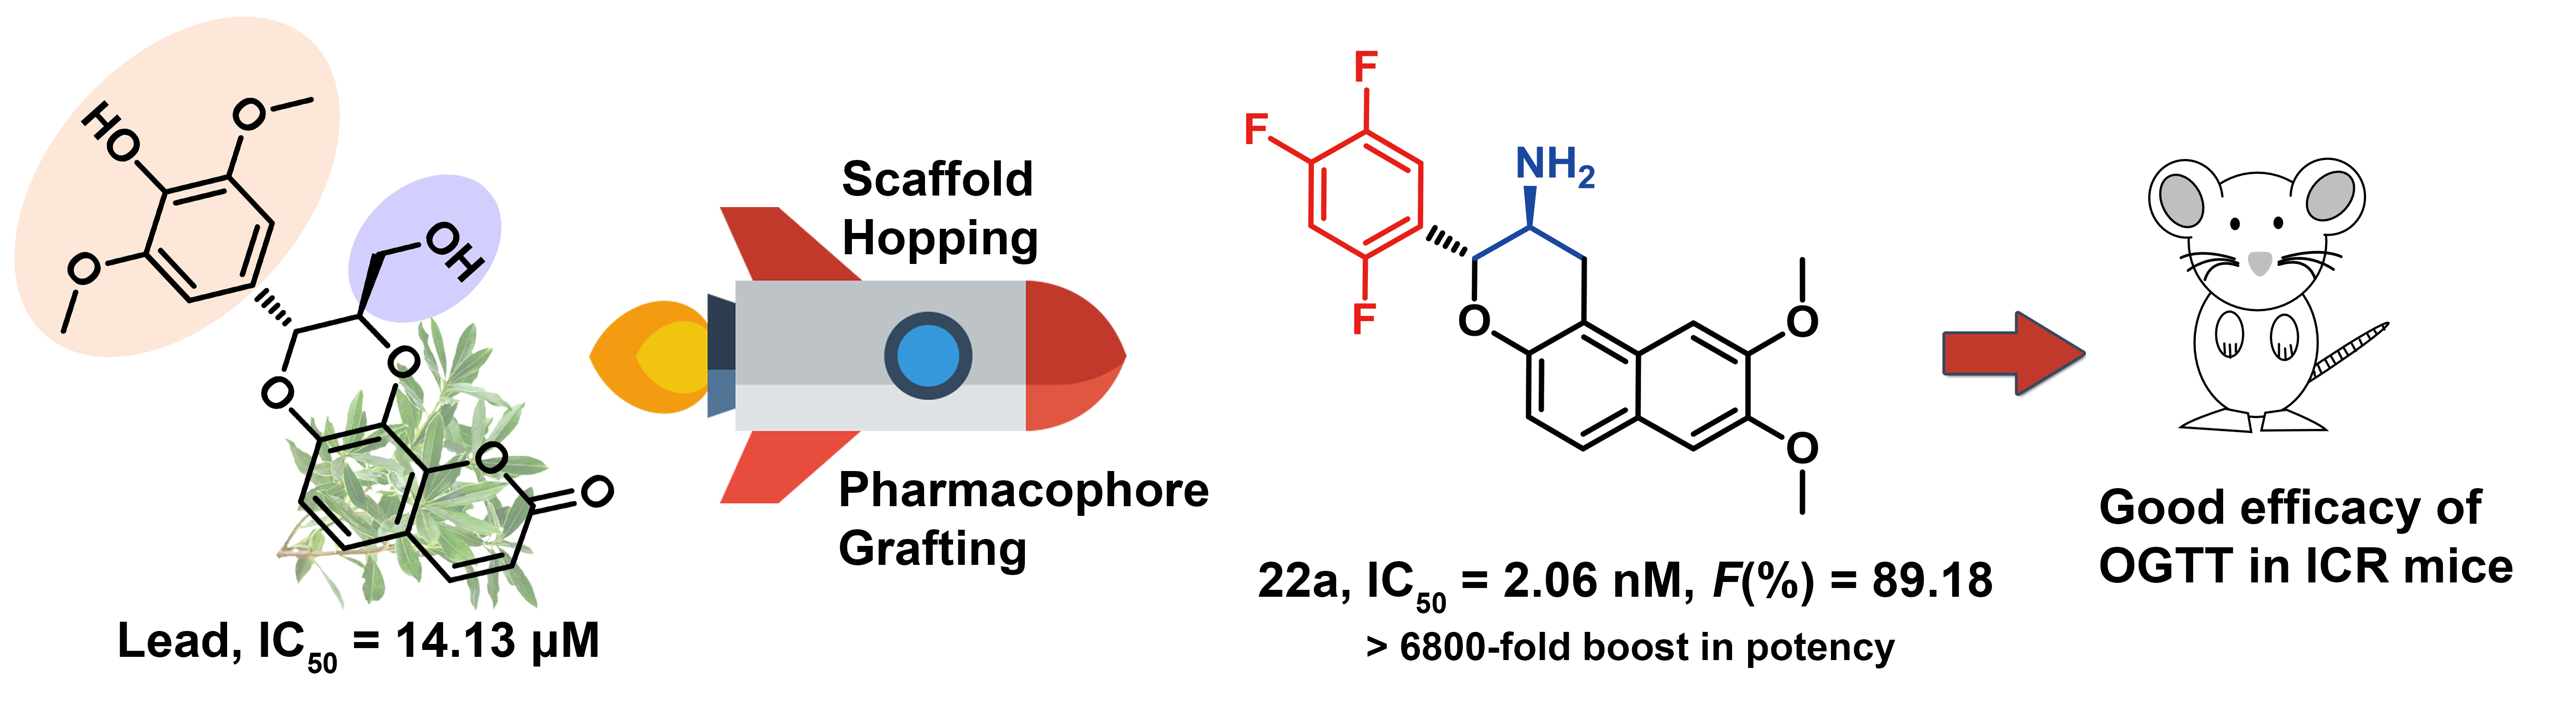 Rational Design of Natural Product-derived Analogs as Novel and Long-acting DPP-4 Inhibitors